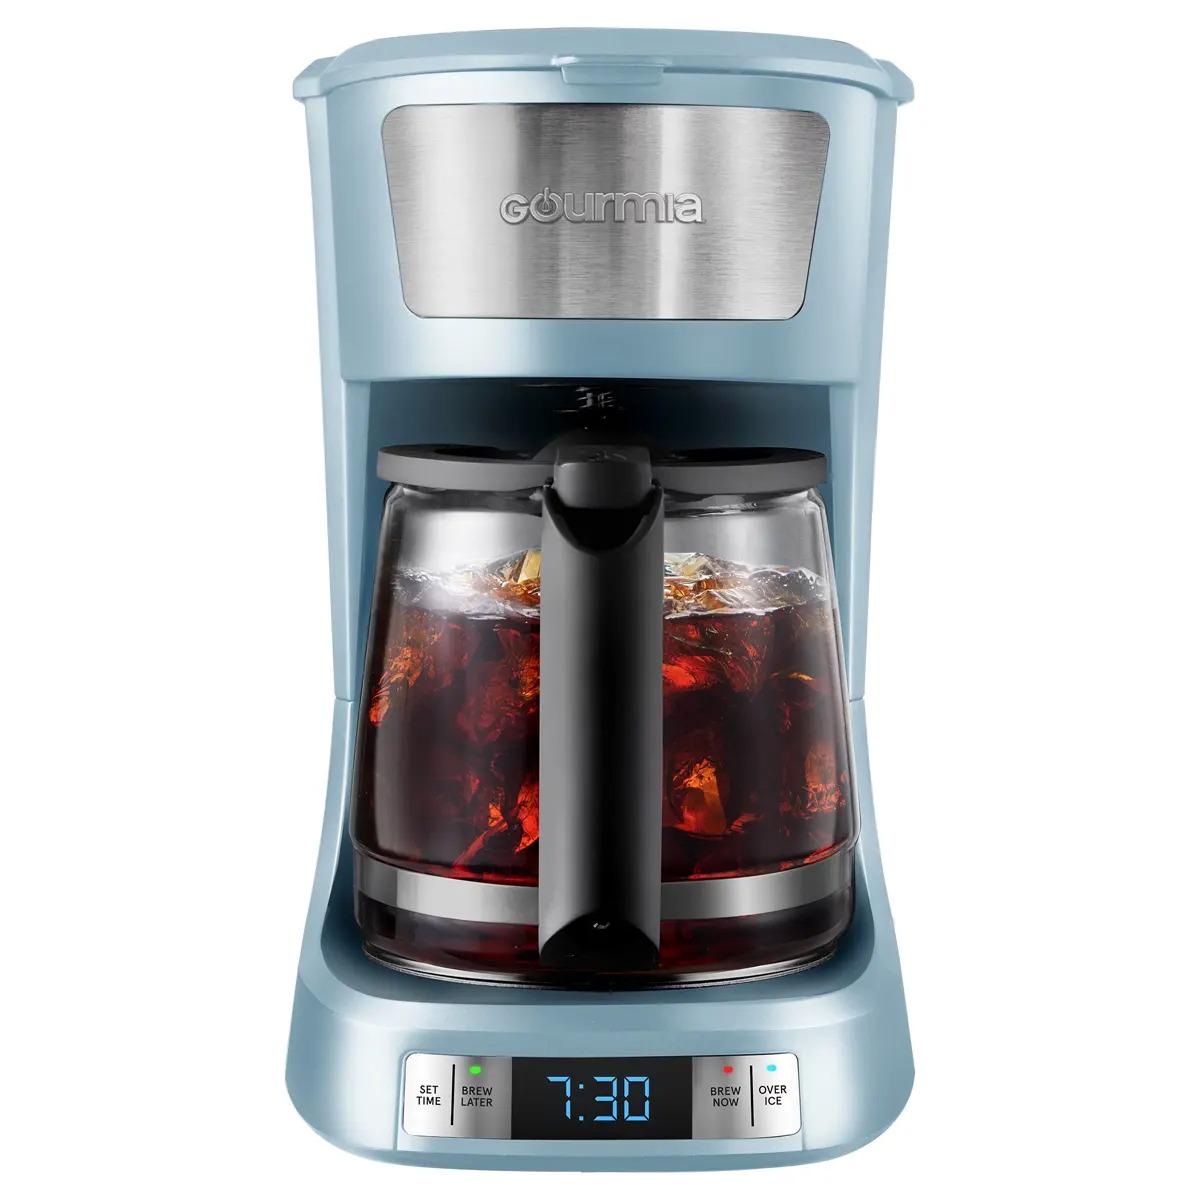 Gourmia Programmable Hot and Iced Coffee Maker for $15